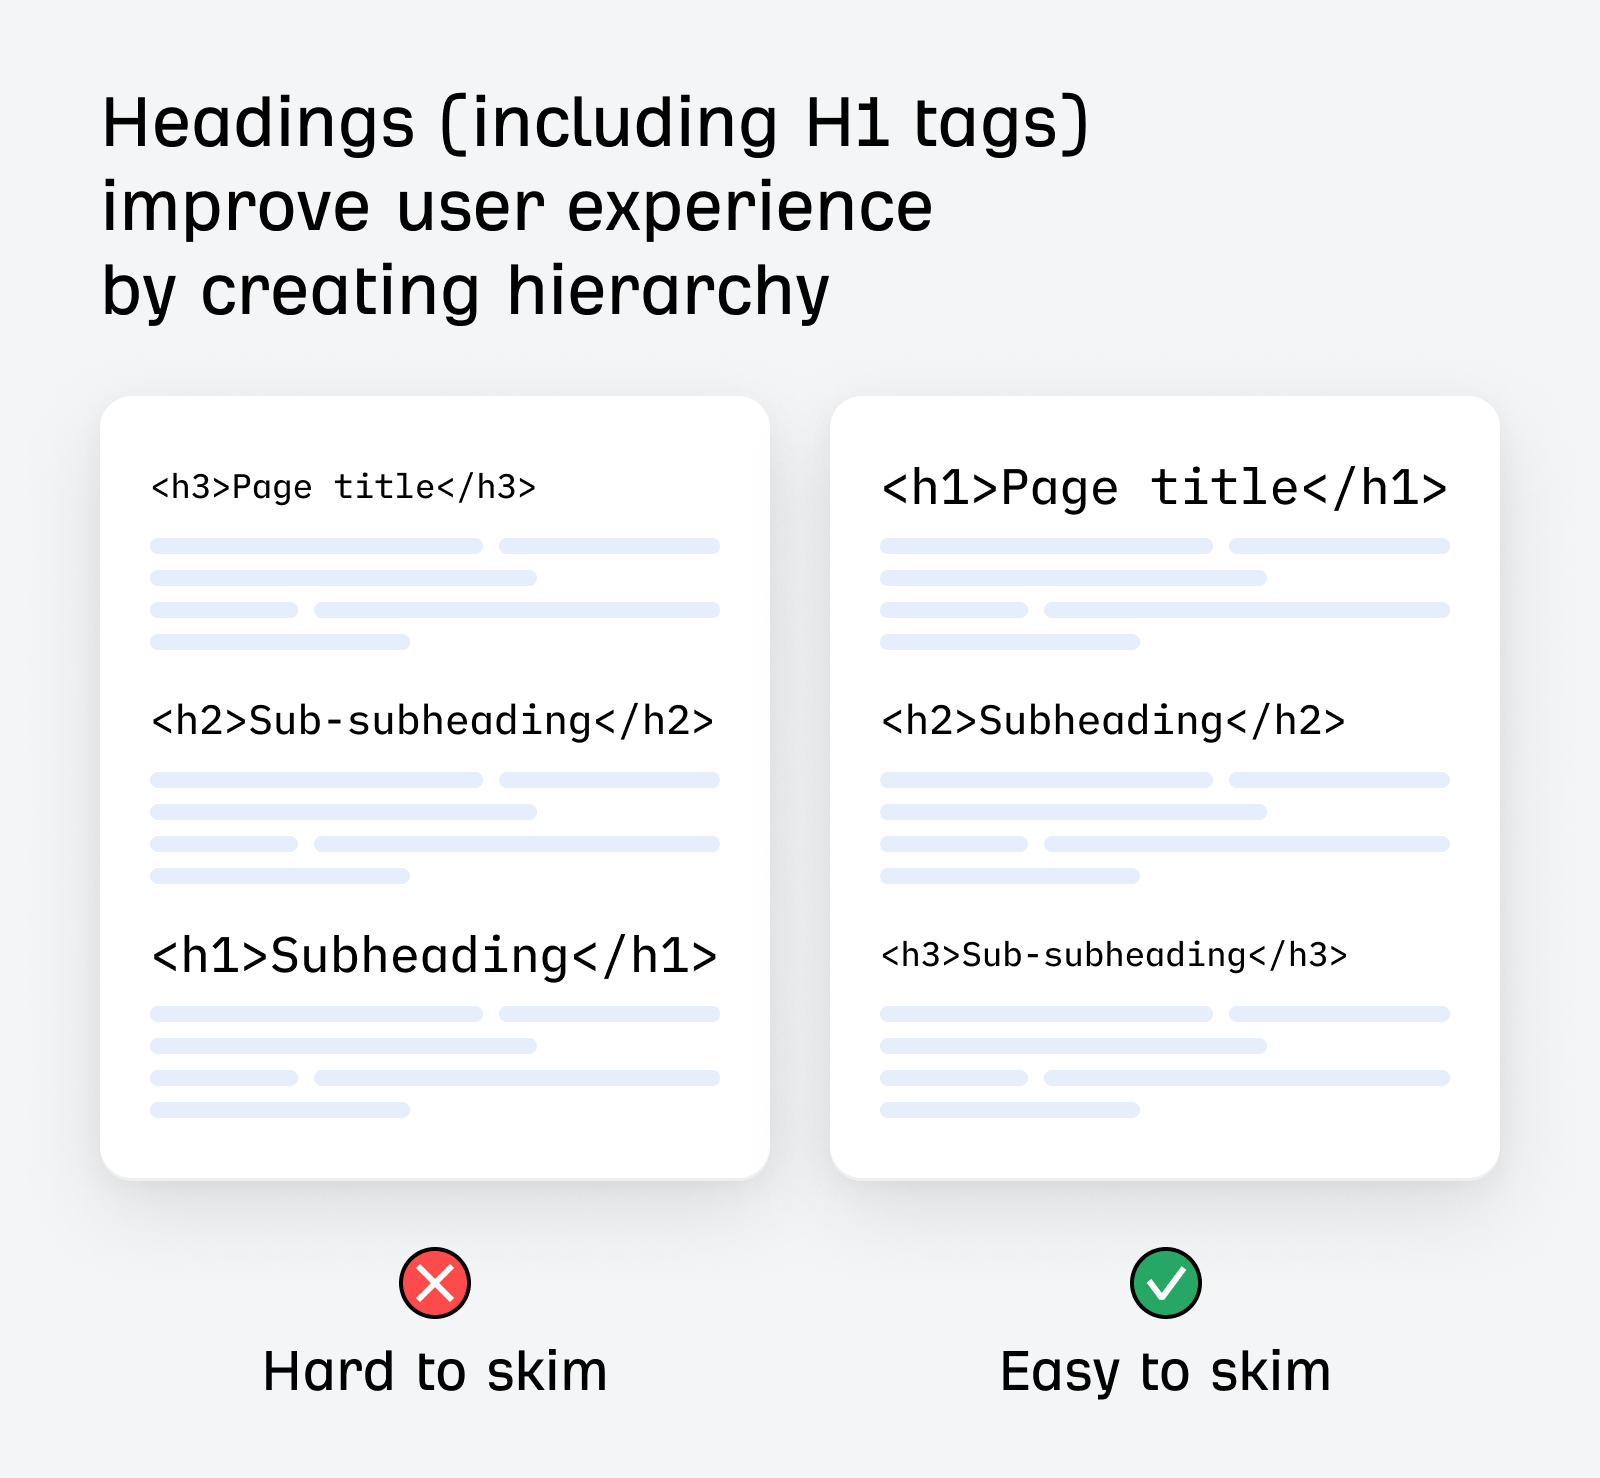 Headings improve user experience by creating hierarchy